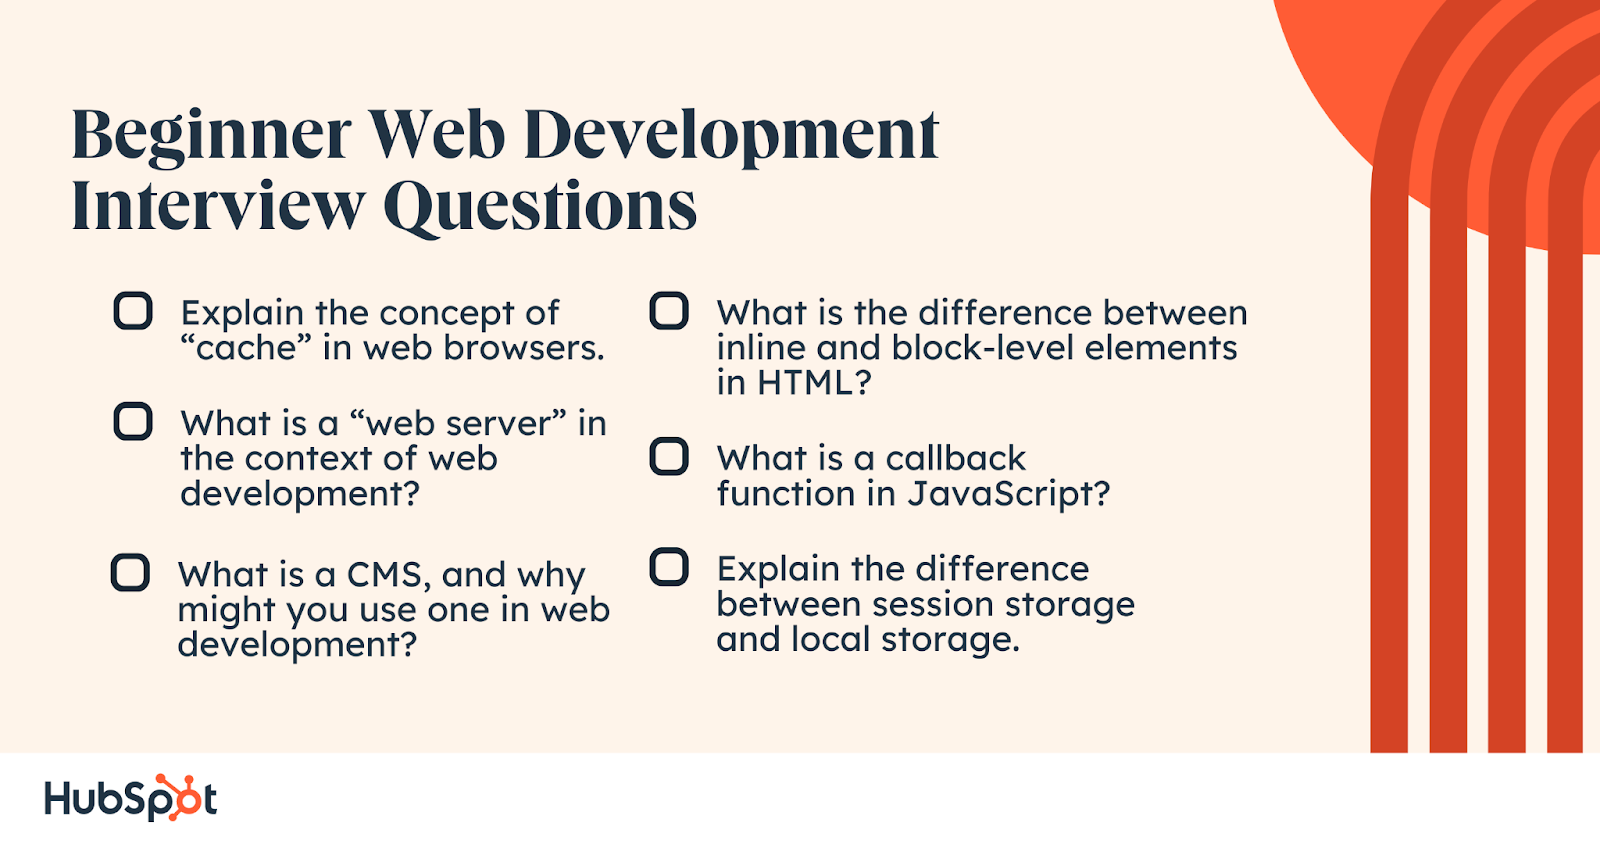 Beginner Web Development Interview Questions.  Explain the concept of “cache” in web browsers. What is a “web server” in the context of web development? What is a CMS, and why might you use one in web development? What is the difference between inline and block-level elements in HTML? What is a callback function in JavaScript? Explain the difference between session storage and local storage.